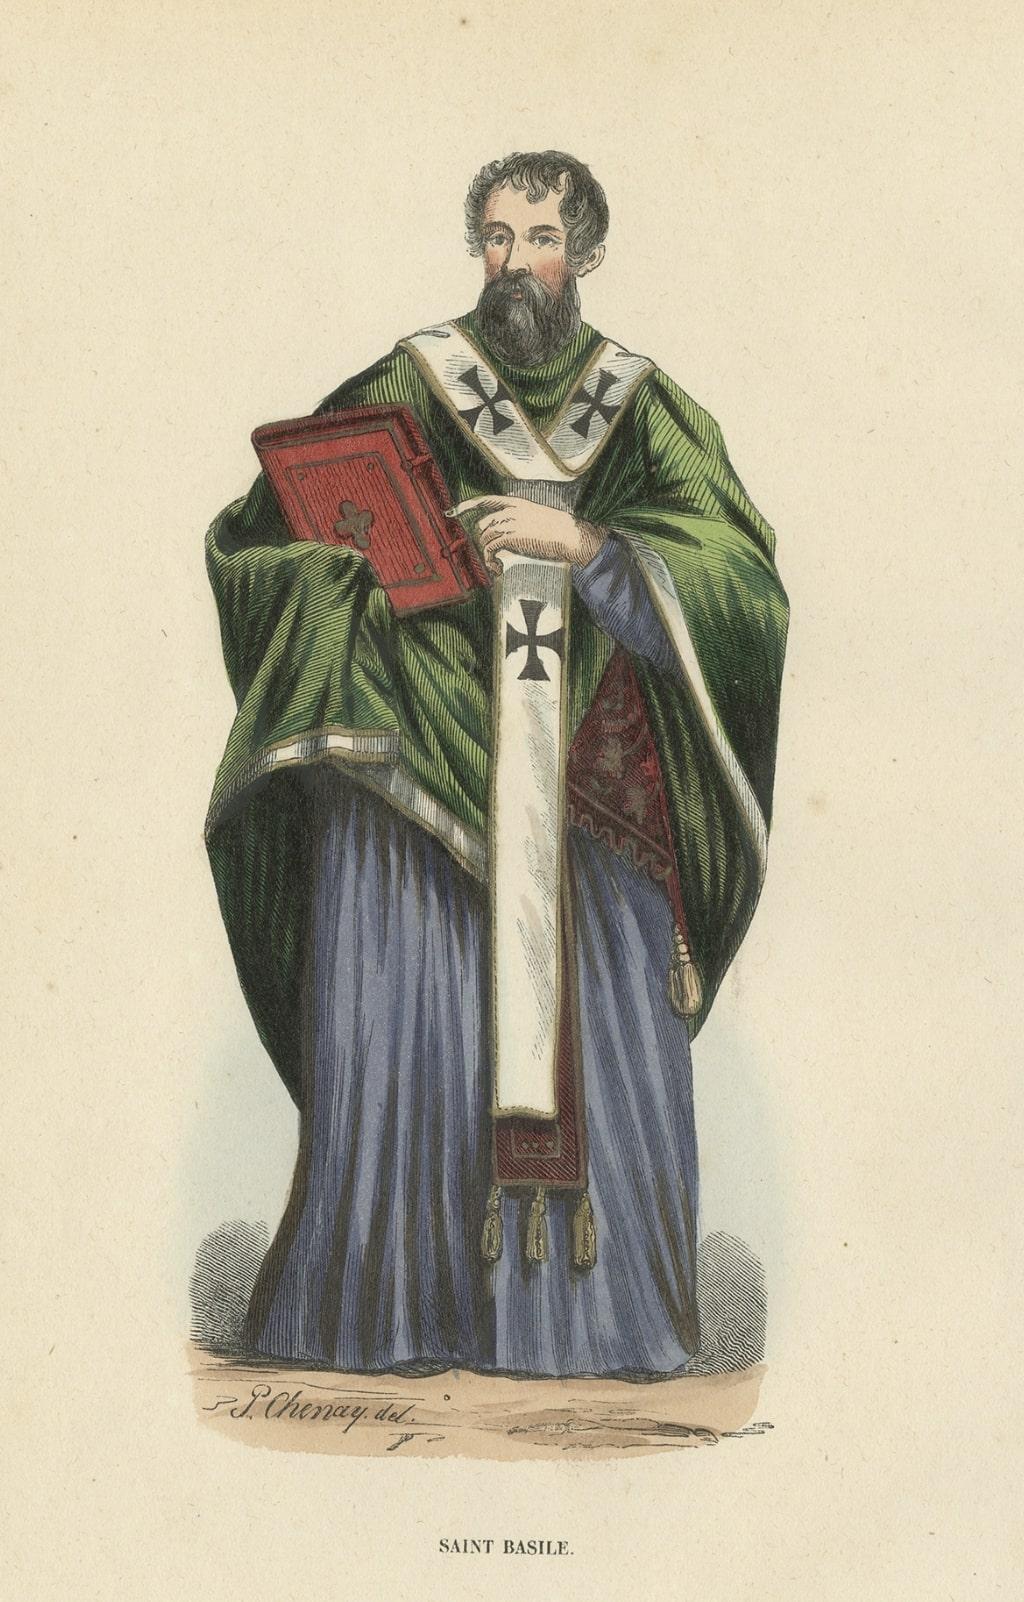 Antique print titled 'Saint Basile'. Print of Saint Basil. 

Basil of Caesarea, also called Saint Basil the Great (330 – January 1 or 2, 379), was a Byzantine bishop of Caesarea Mazaca in Cappadocia, Asia Minor (modern-day Turkey). He was an